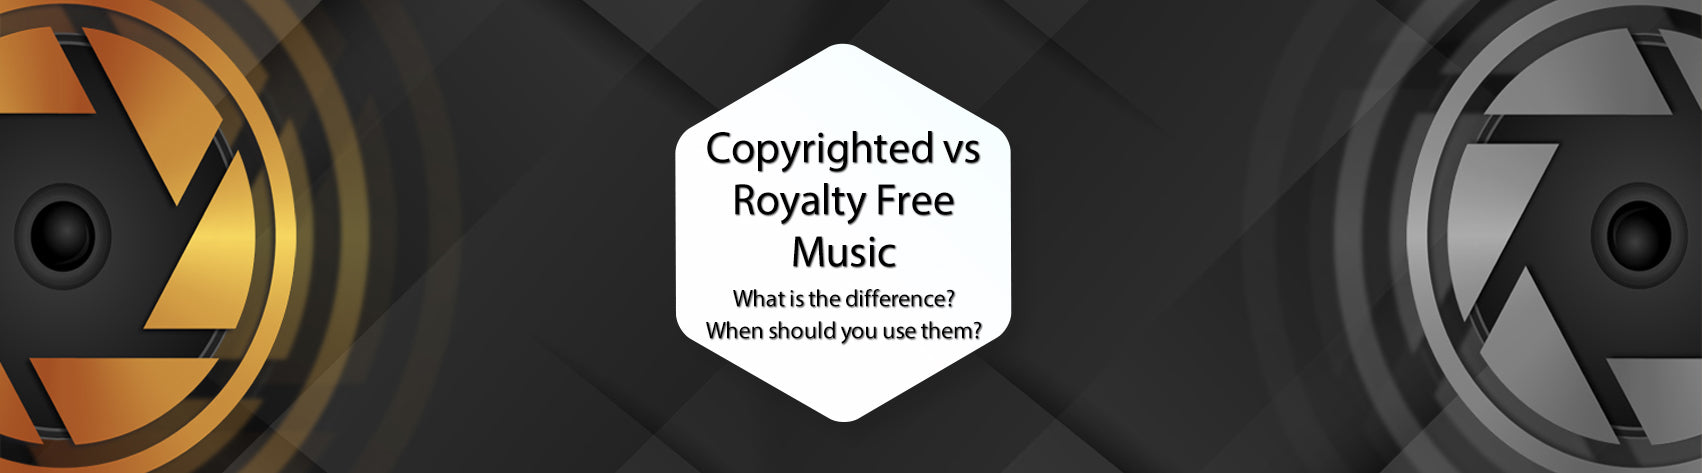 Copyrighted Music vs Royalty Free Music